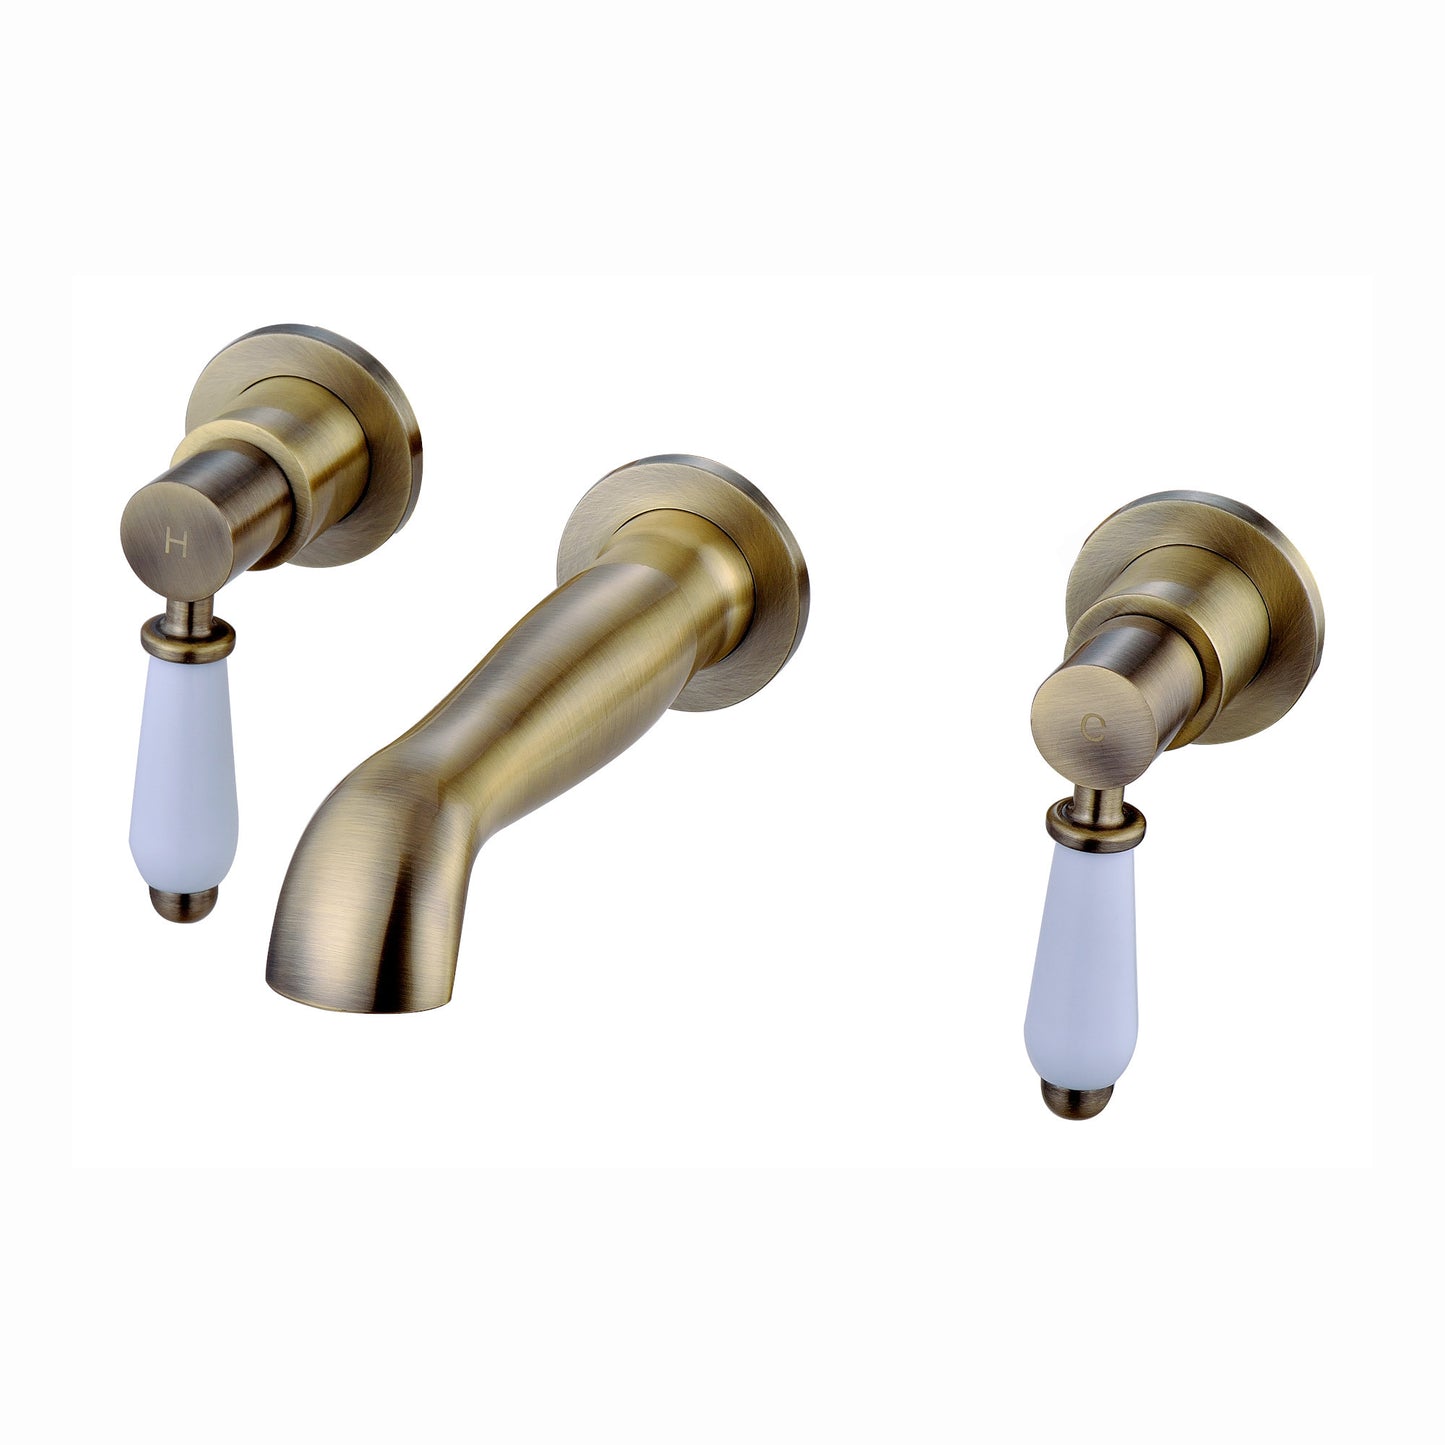 Downton wall-mount basin mixer tap 3 hole with white ceramic levers - antique bronze